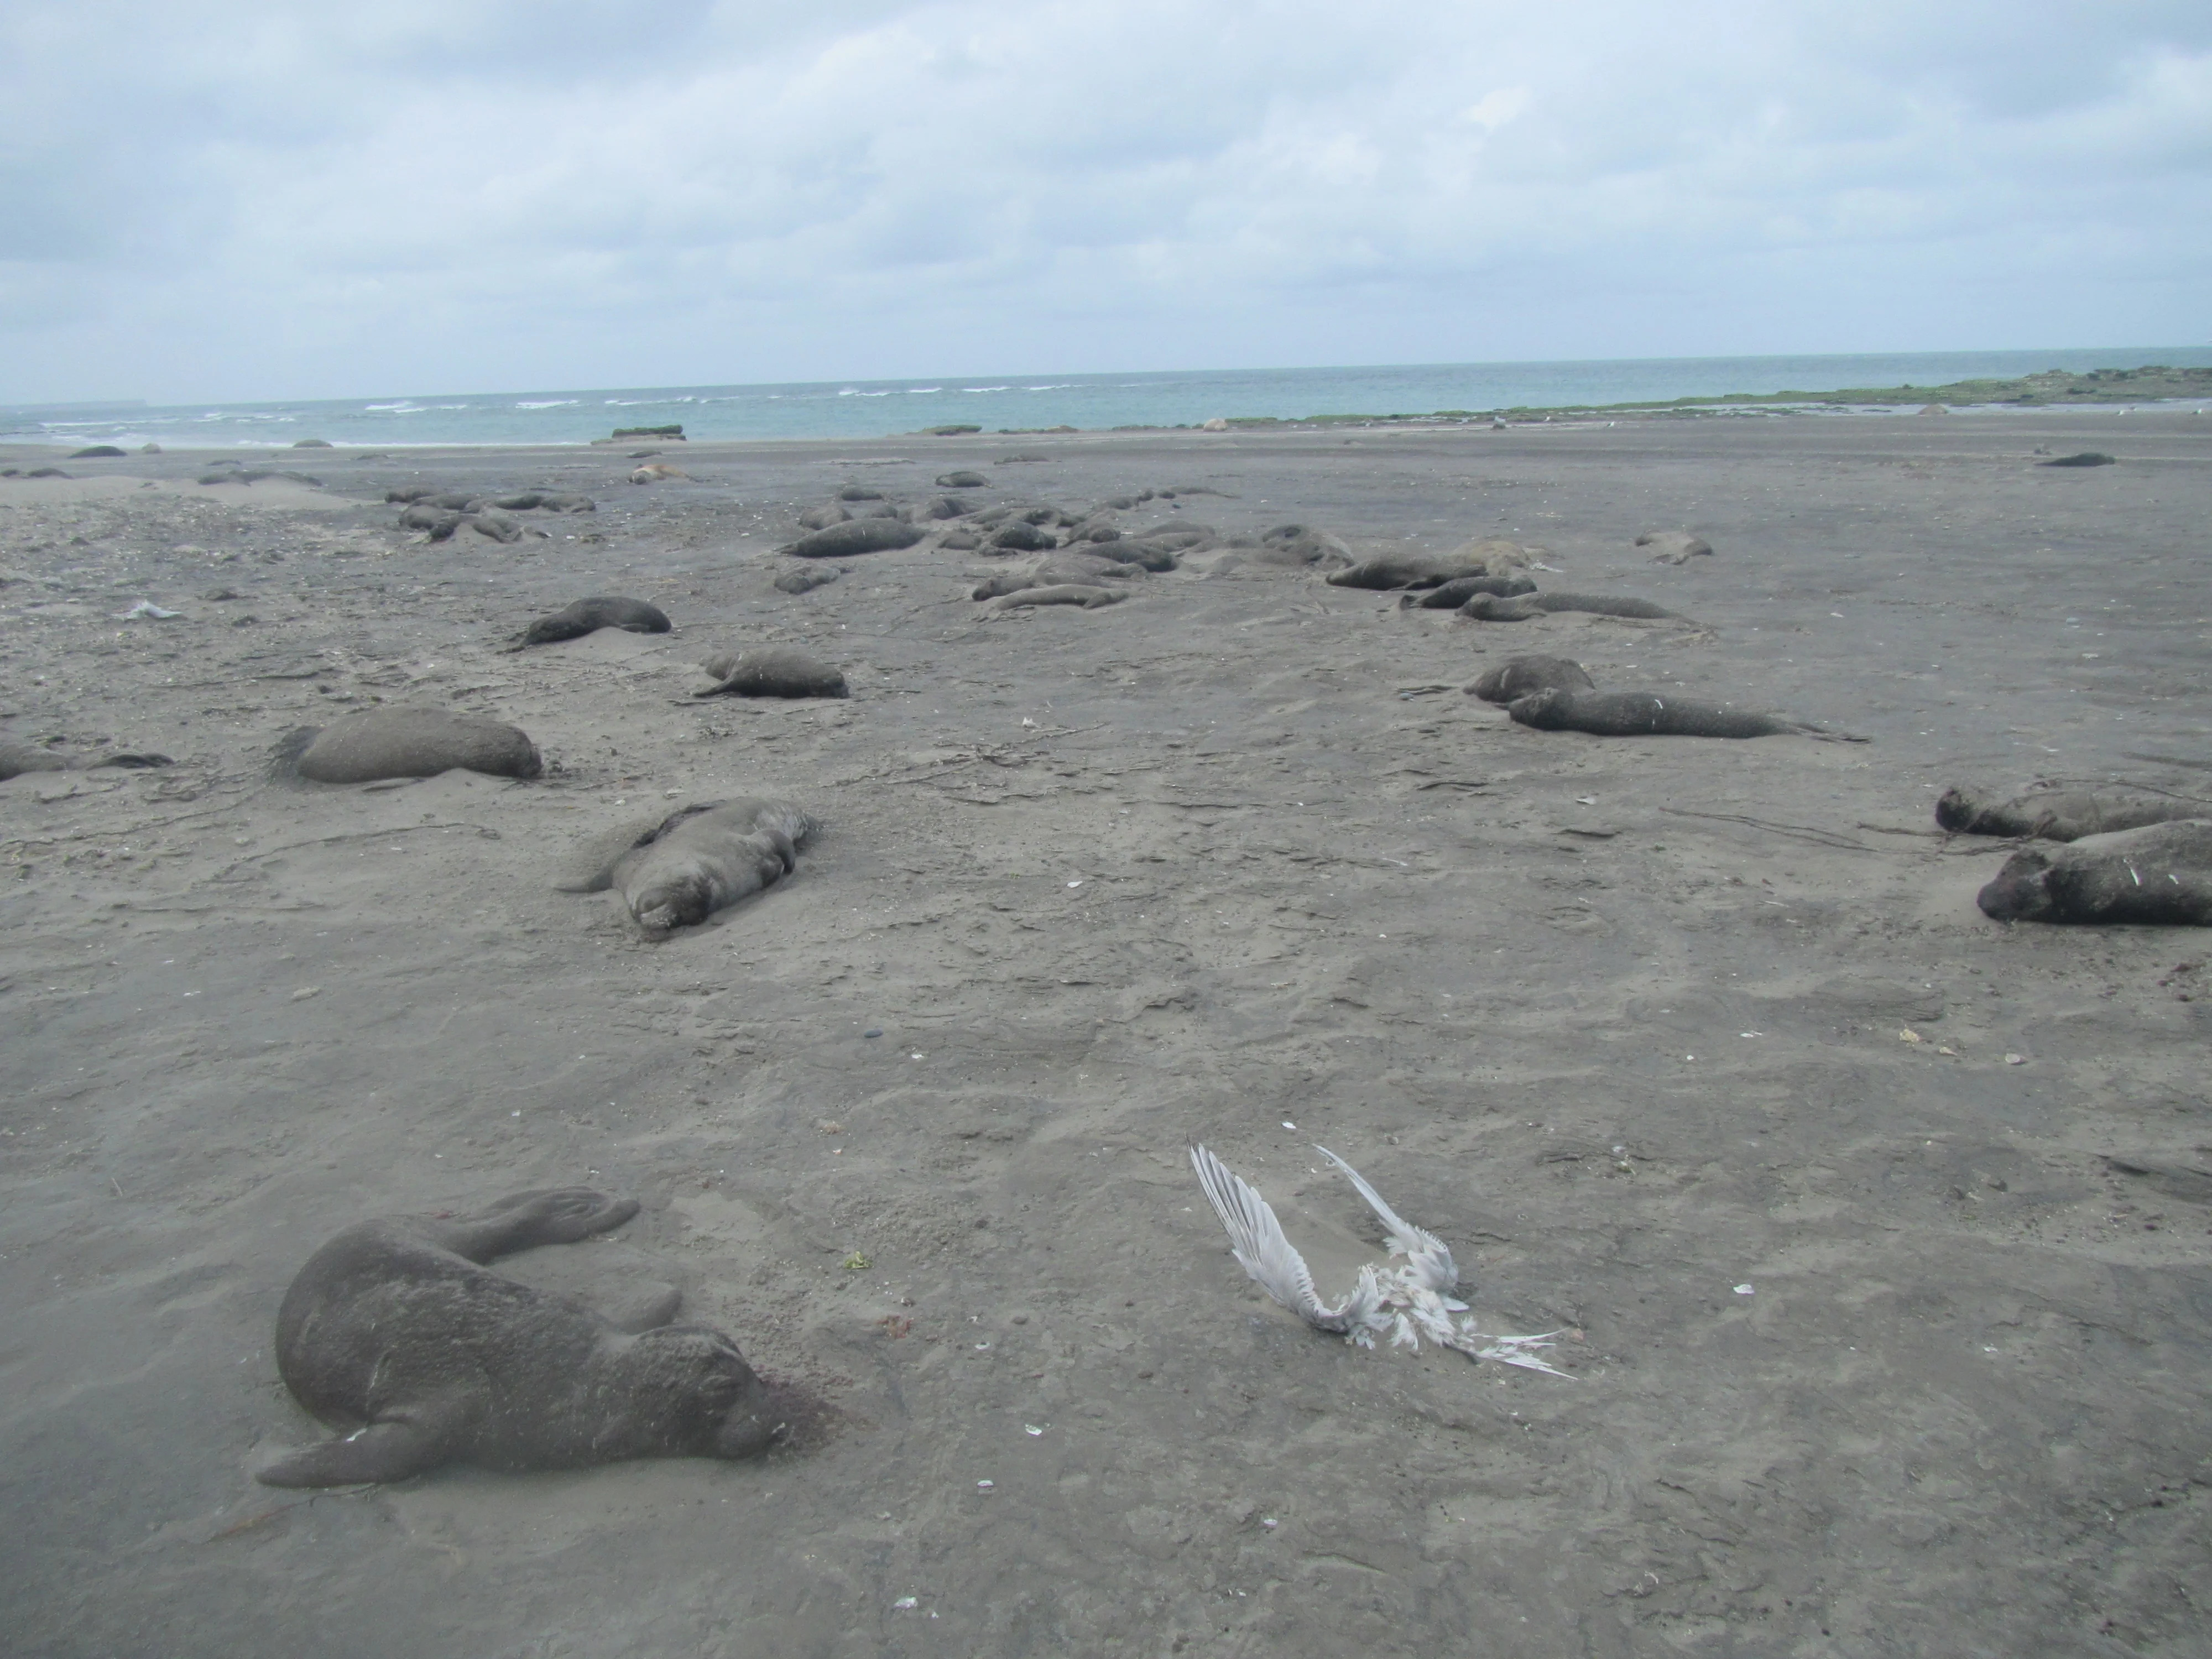 A number of dead young elephant seals, eyes closed, on a beach